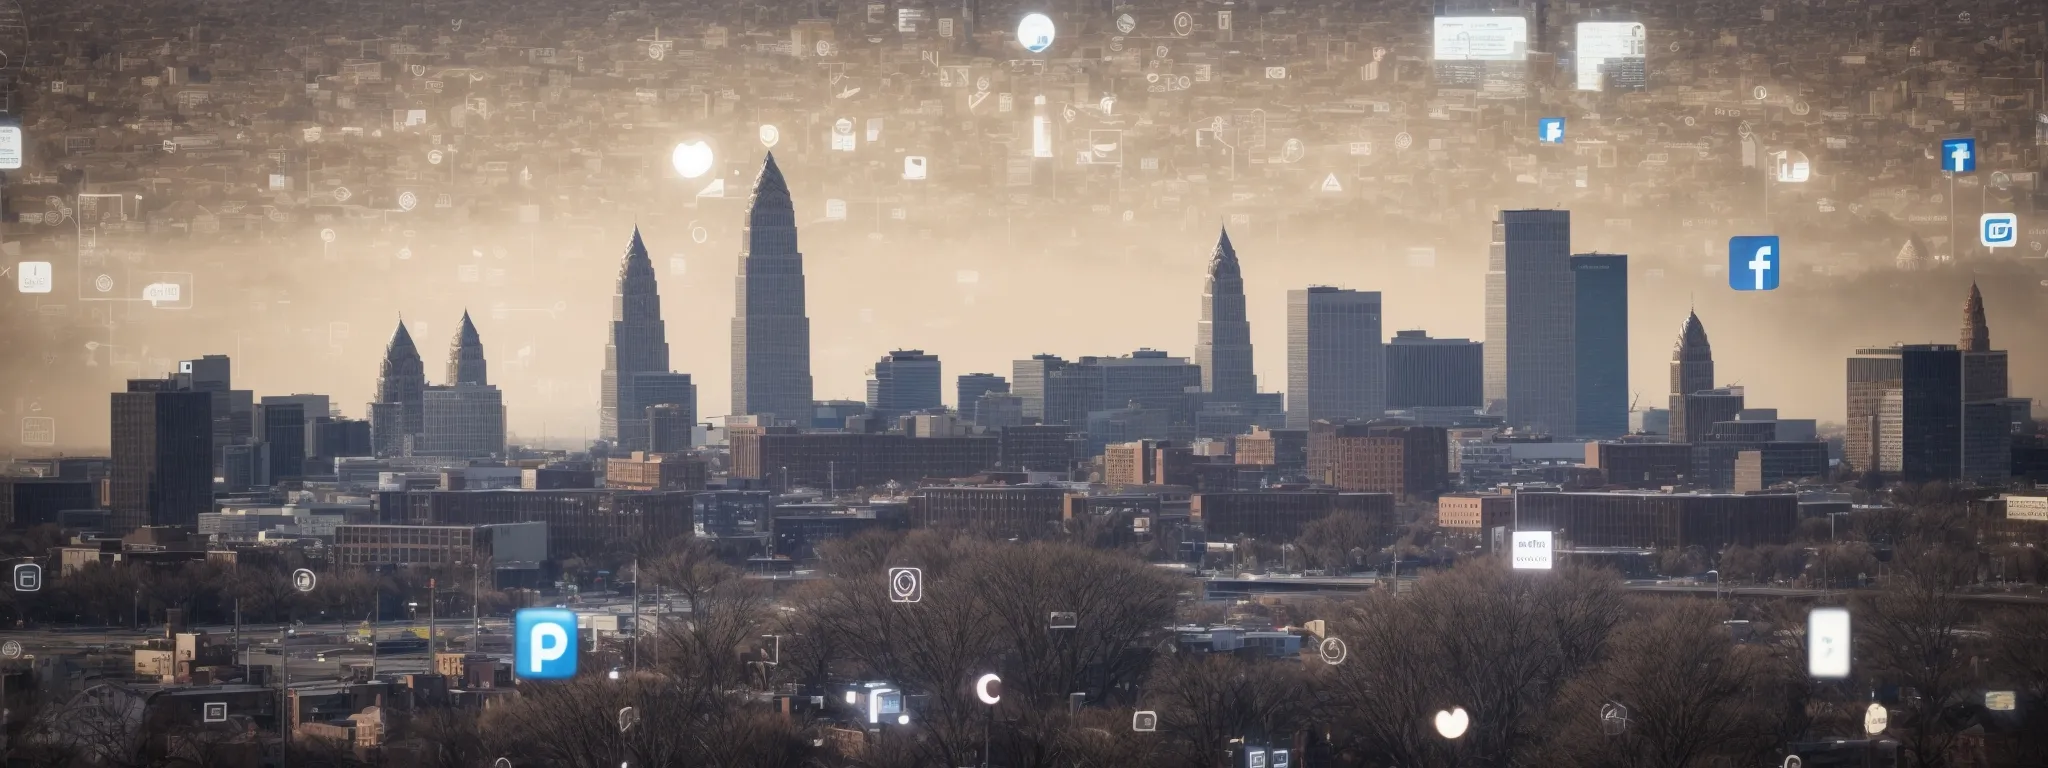 a skyline of cleveland with an overlay of social media icons and a magnifying glass focusing on a web link.